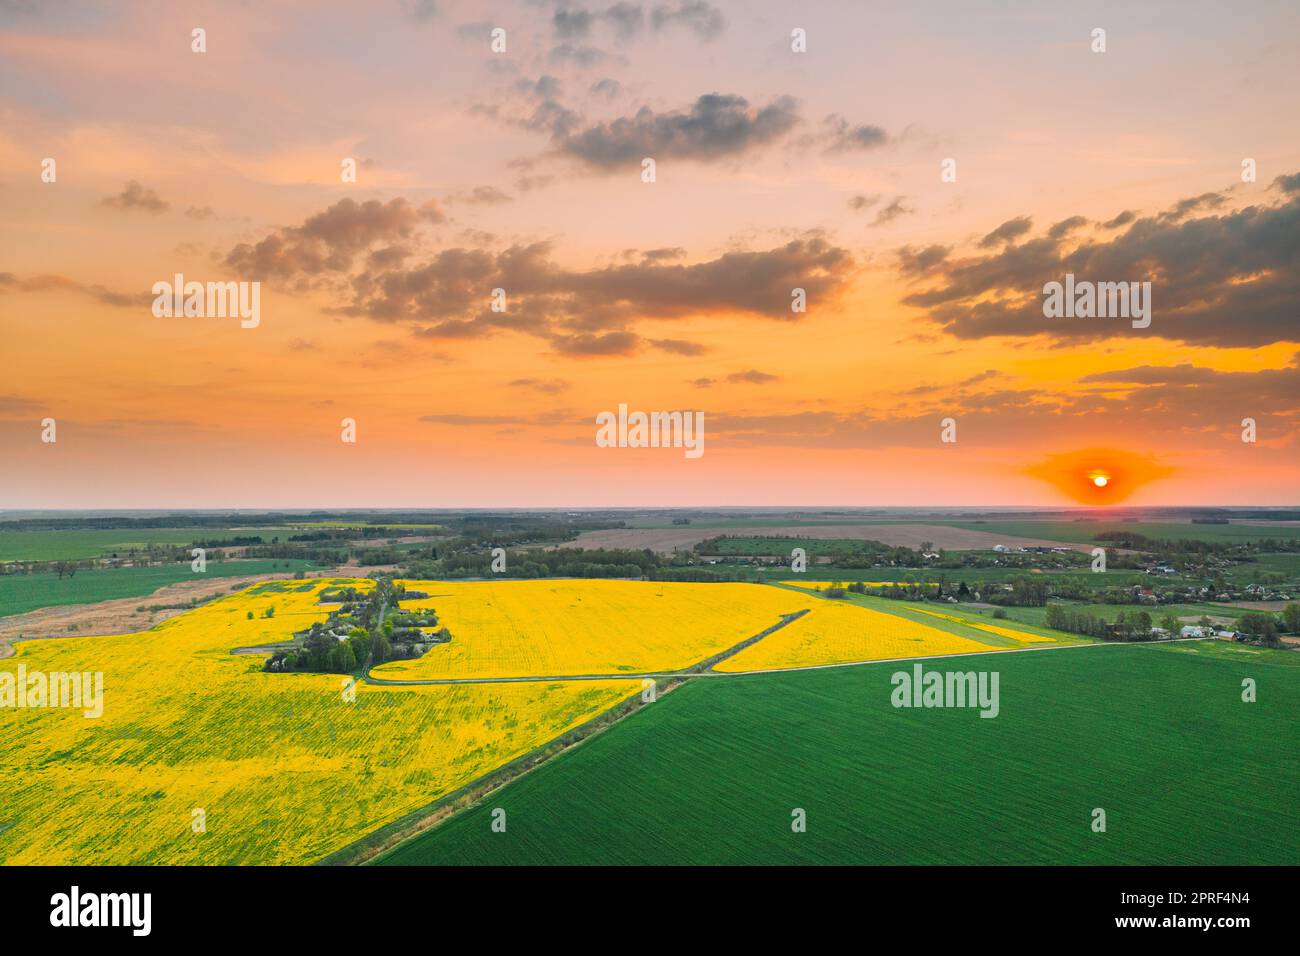 Aerial View Of Green Meadow And Field With Blooming Canola Yellow Flowers. Top View Of Blossom Plant, Rapeseed Meadow Grass Landscape At Sunset Sunrise. Agricultural Country Landscape. Drone View. Stock Photo